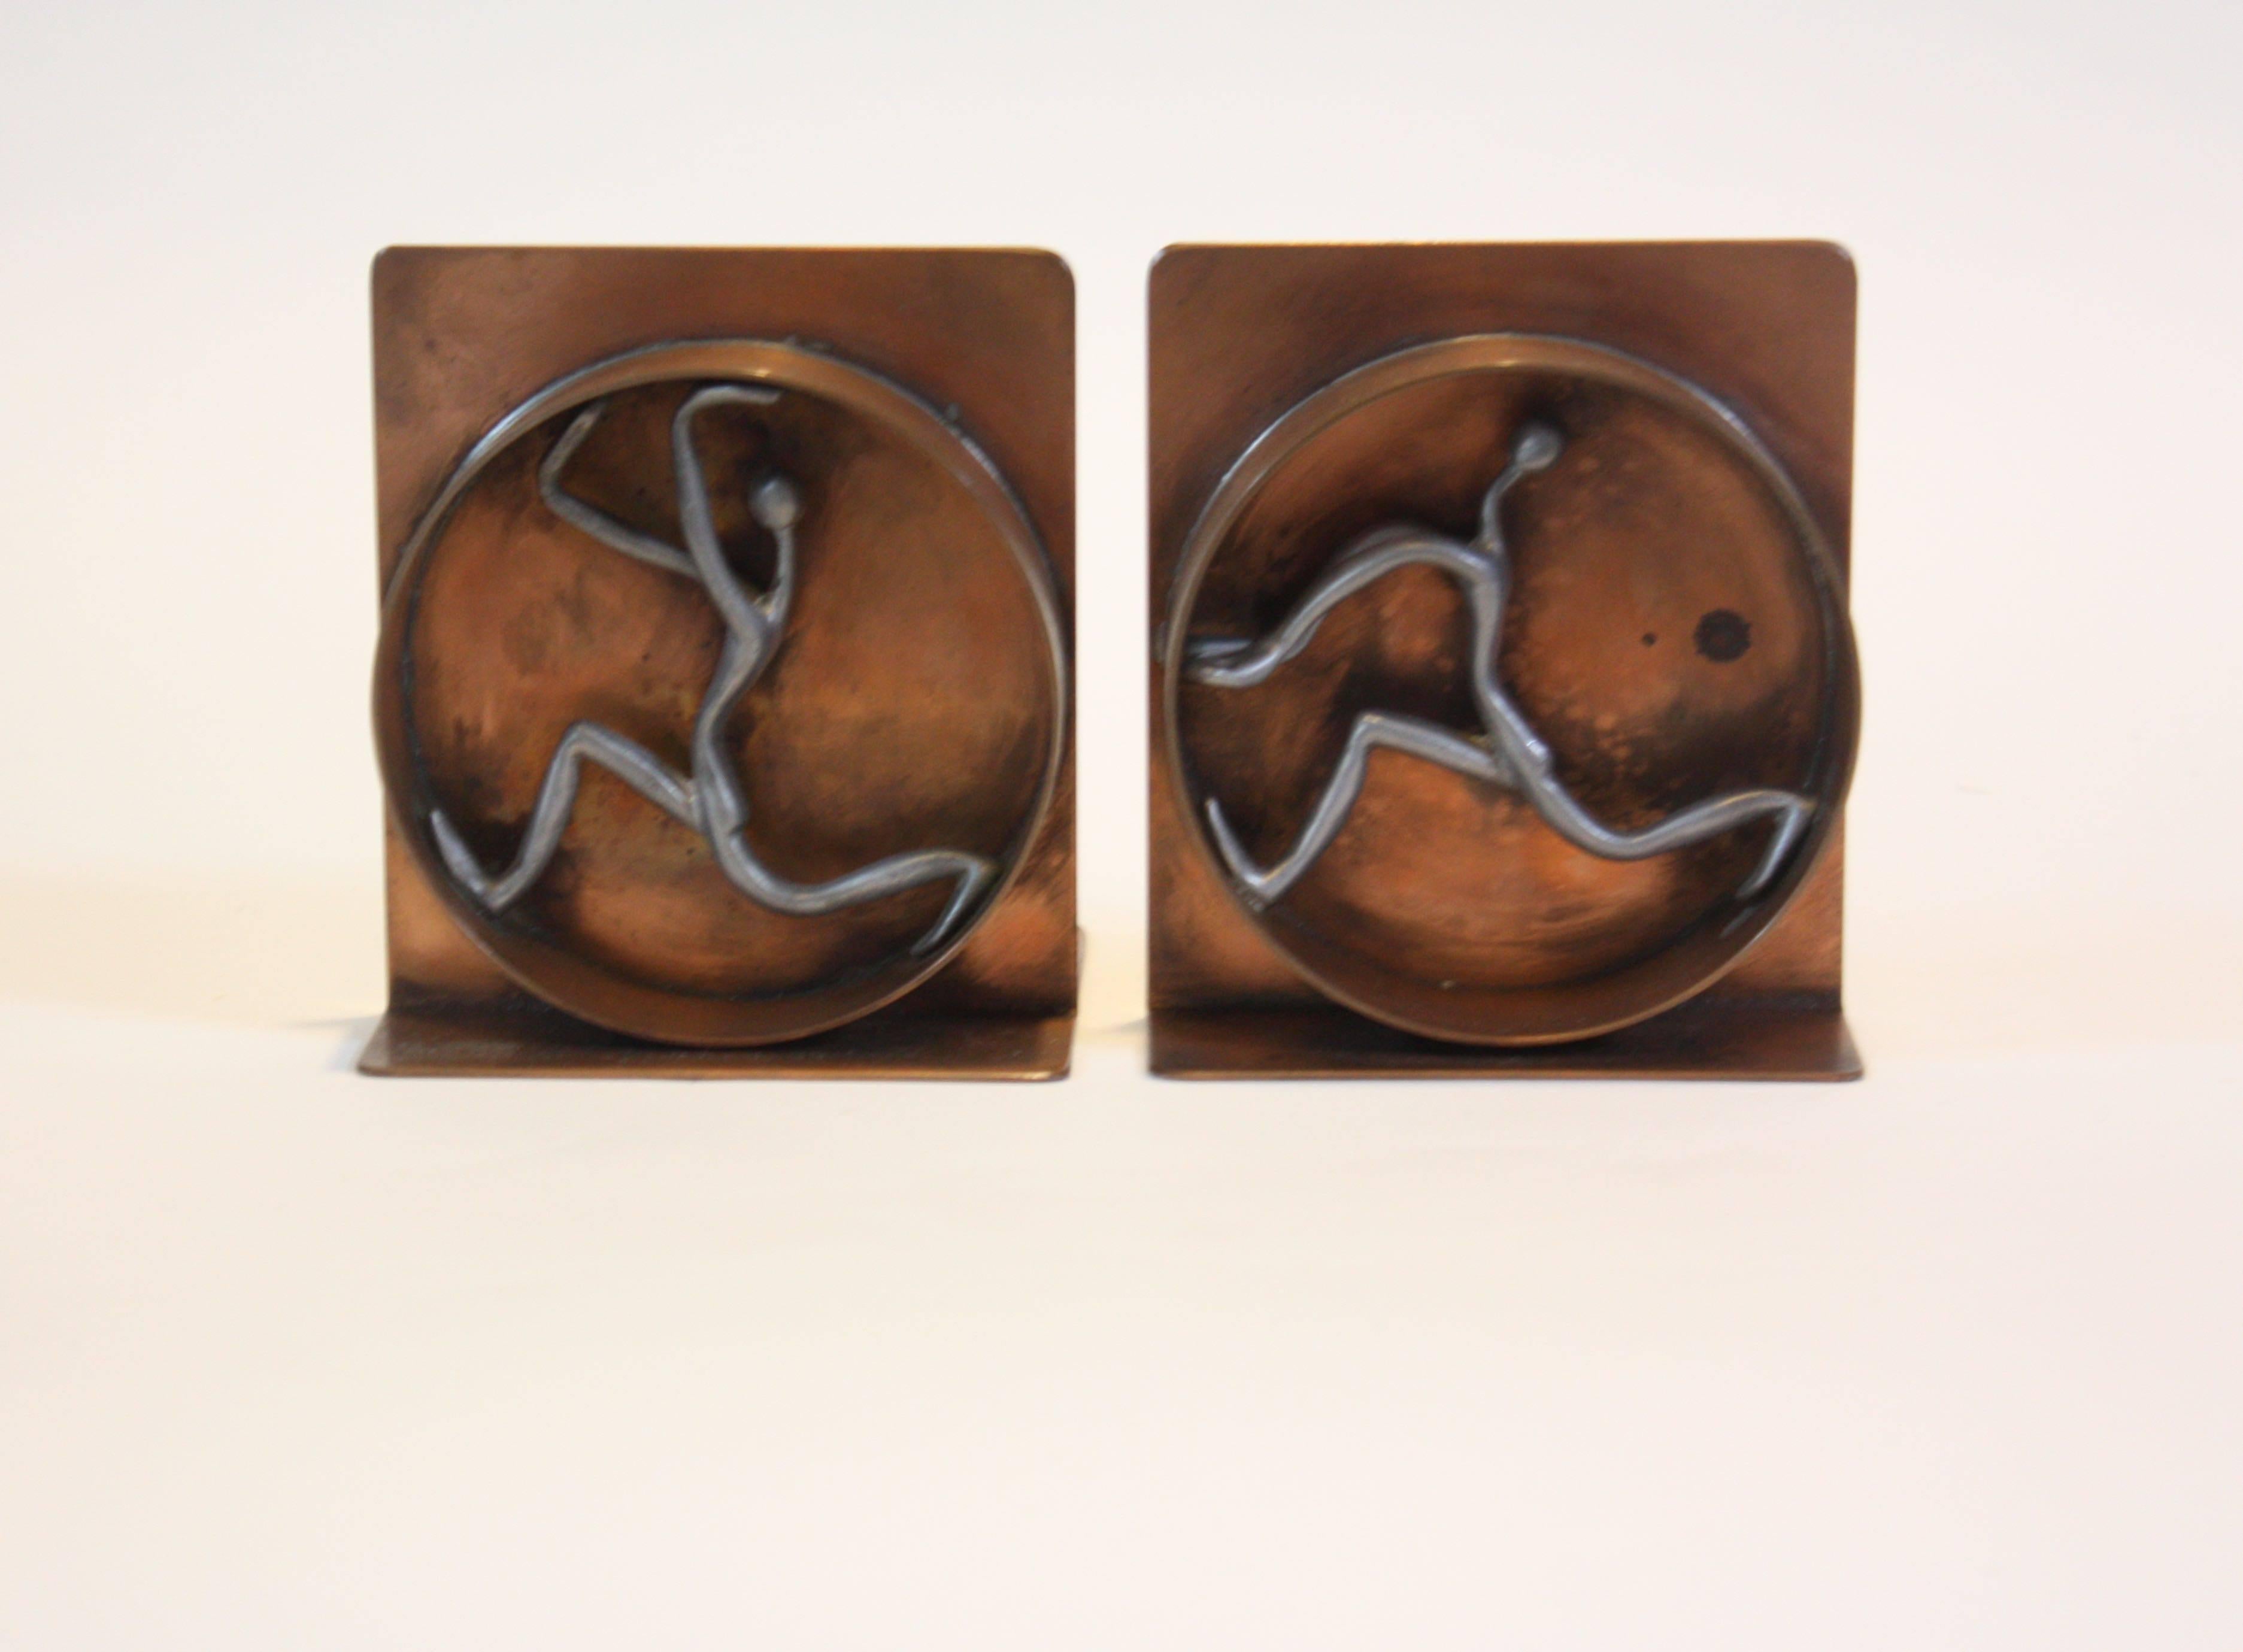 These whimsical bookends depict two human figures running on human hamster wheels. The figures themselves are pewter, and the bookends are copper. Artist signed on both bookends.